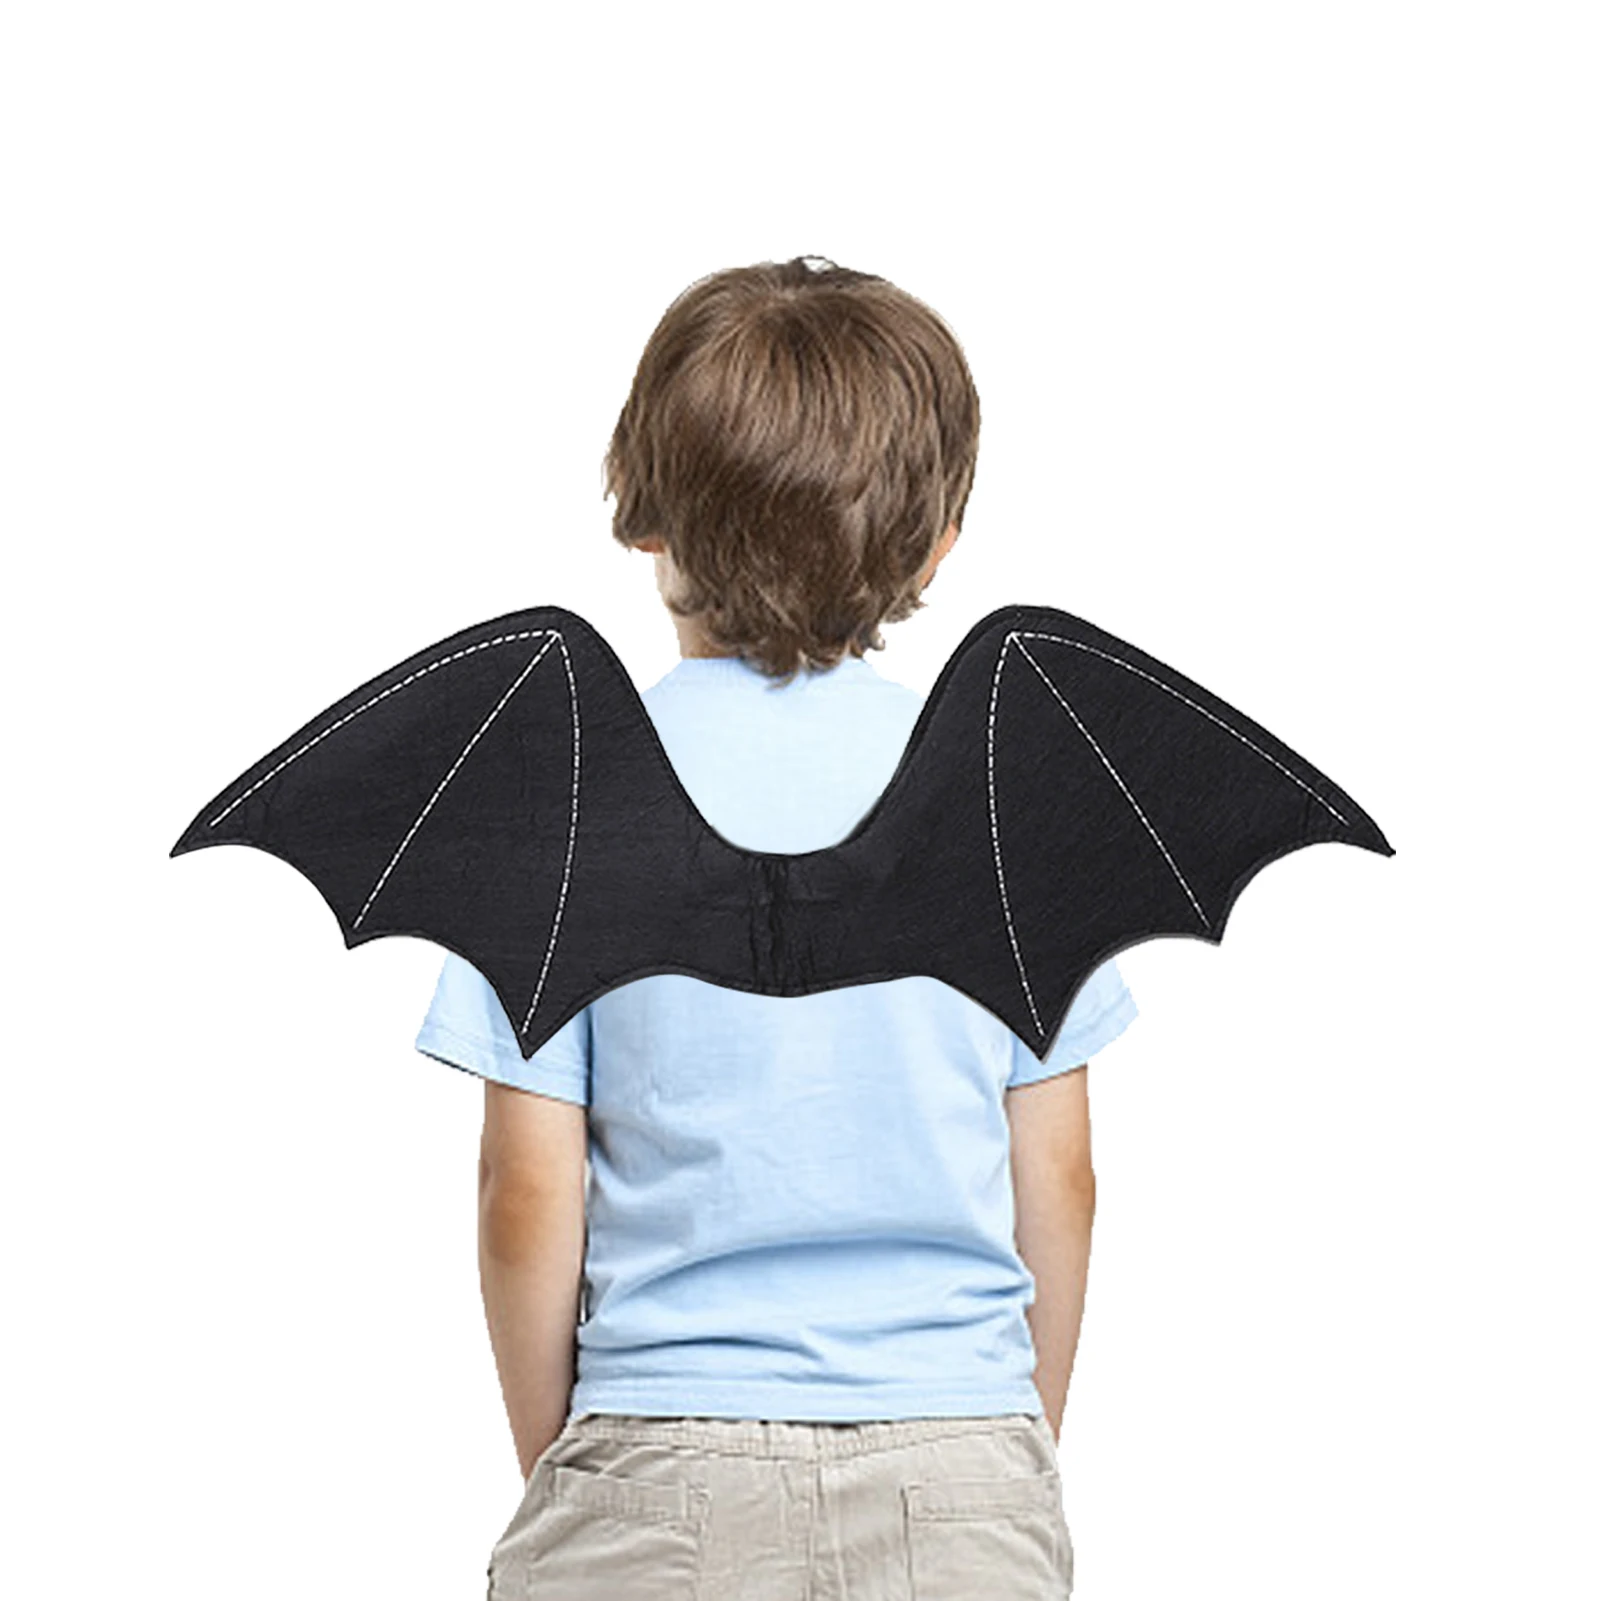 

Kids Bat Costume Black Bat Wings Costume Cosplay Wing Party Favors Photography Props Halloween Decorations